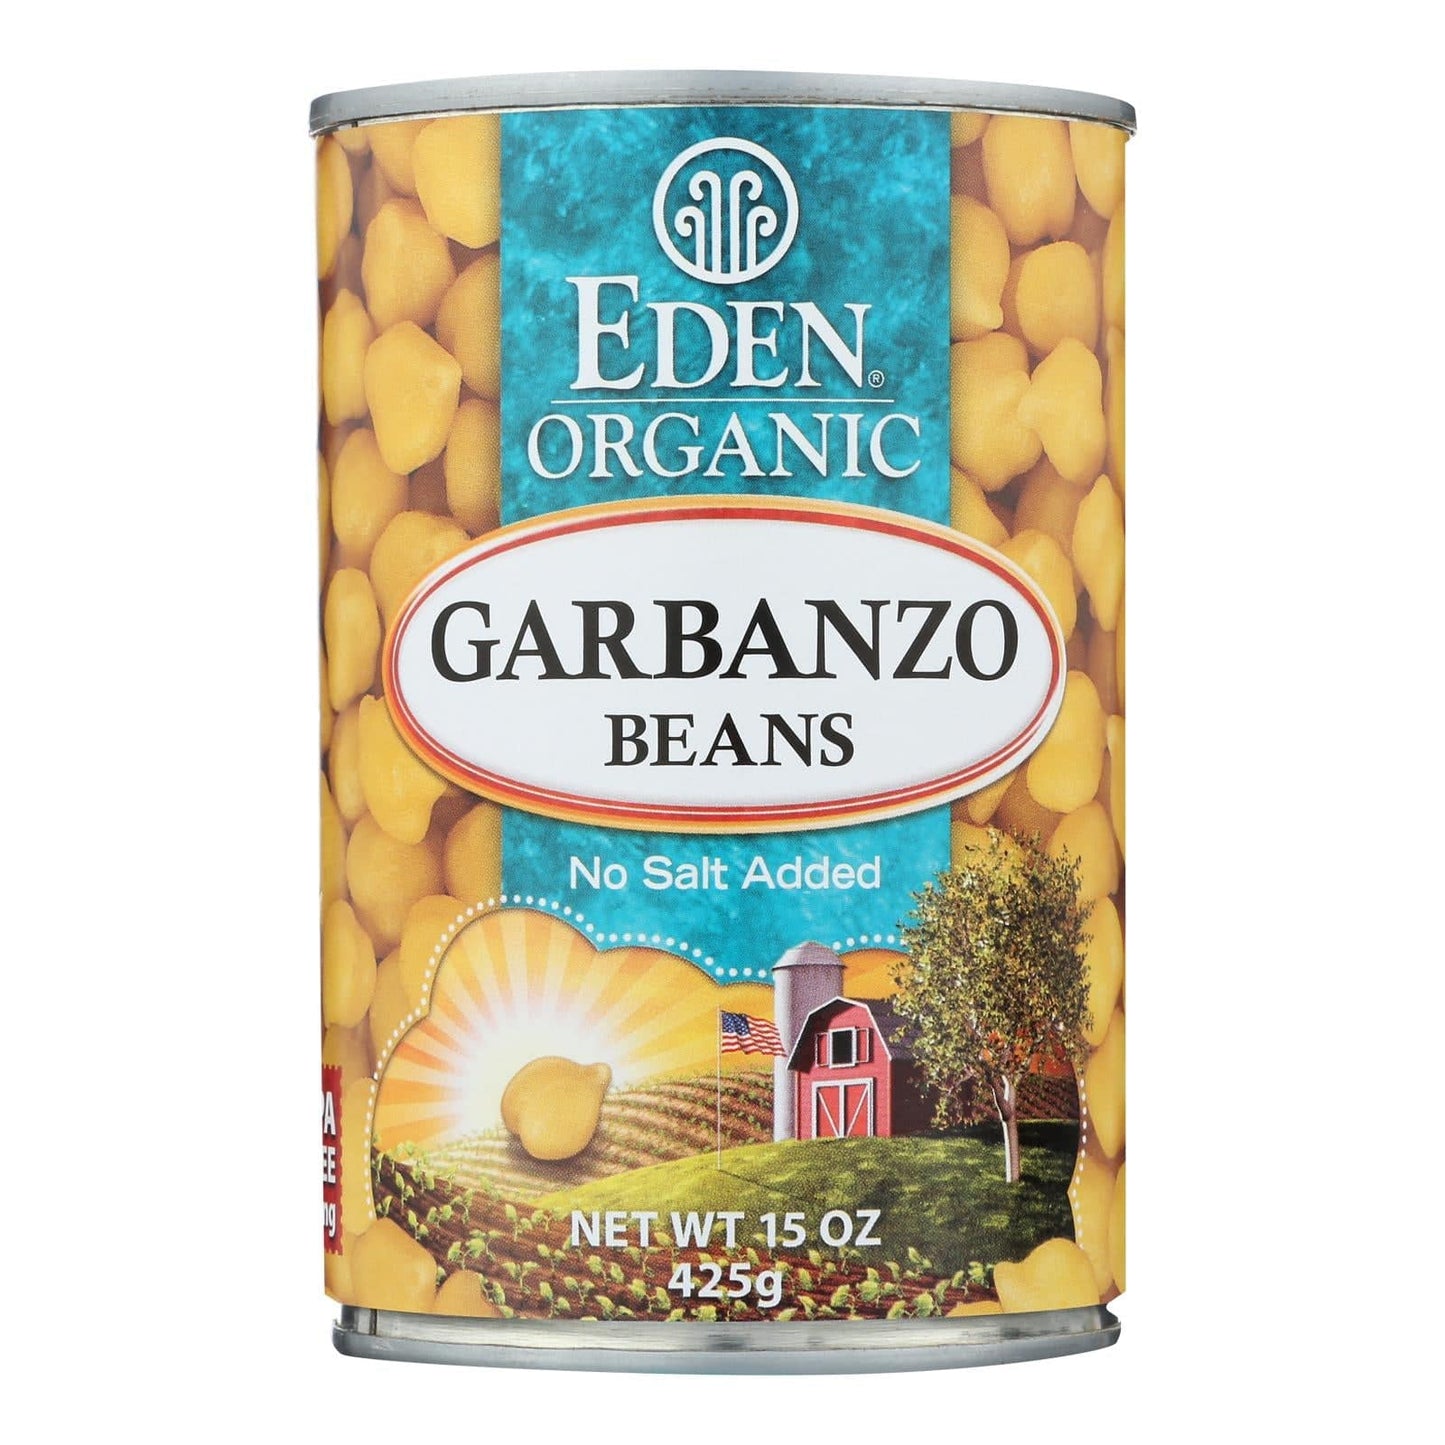 Buy Eden Foods Organic Garbanzo Beans - Case Of 12 - 15 Oz.  at OnlyNaturals.us